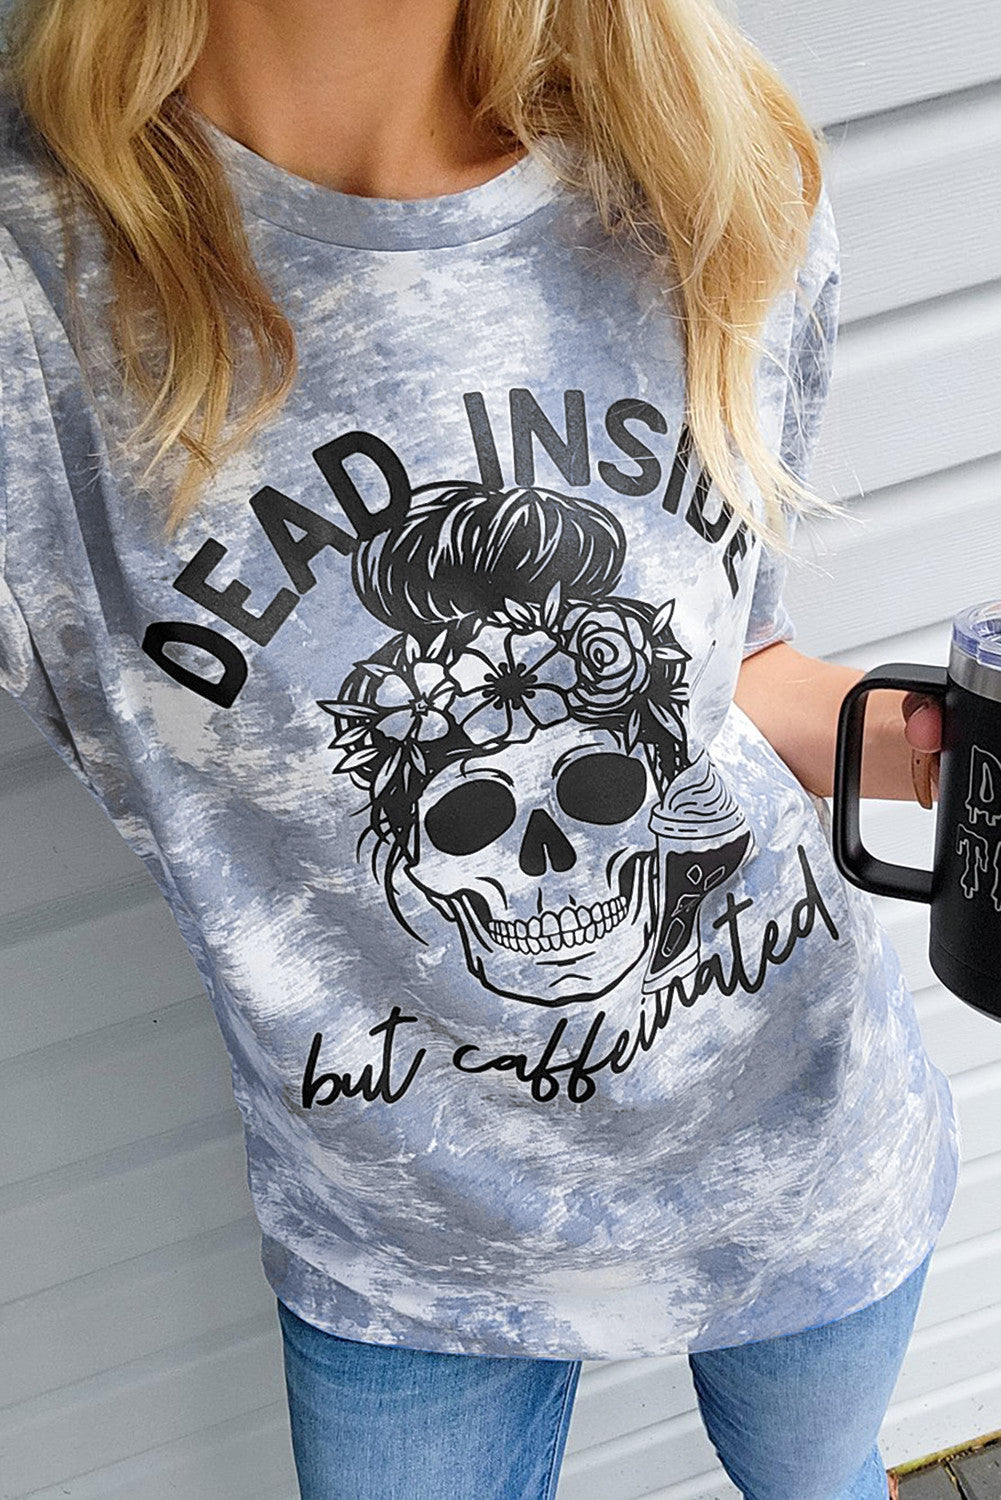 Dead INSIDE but caffeinated Graphic Tee Item NO.: 3645